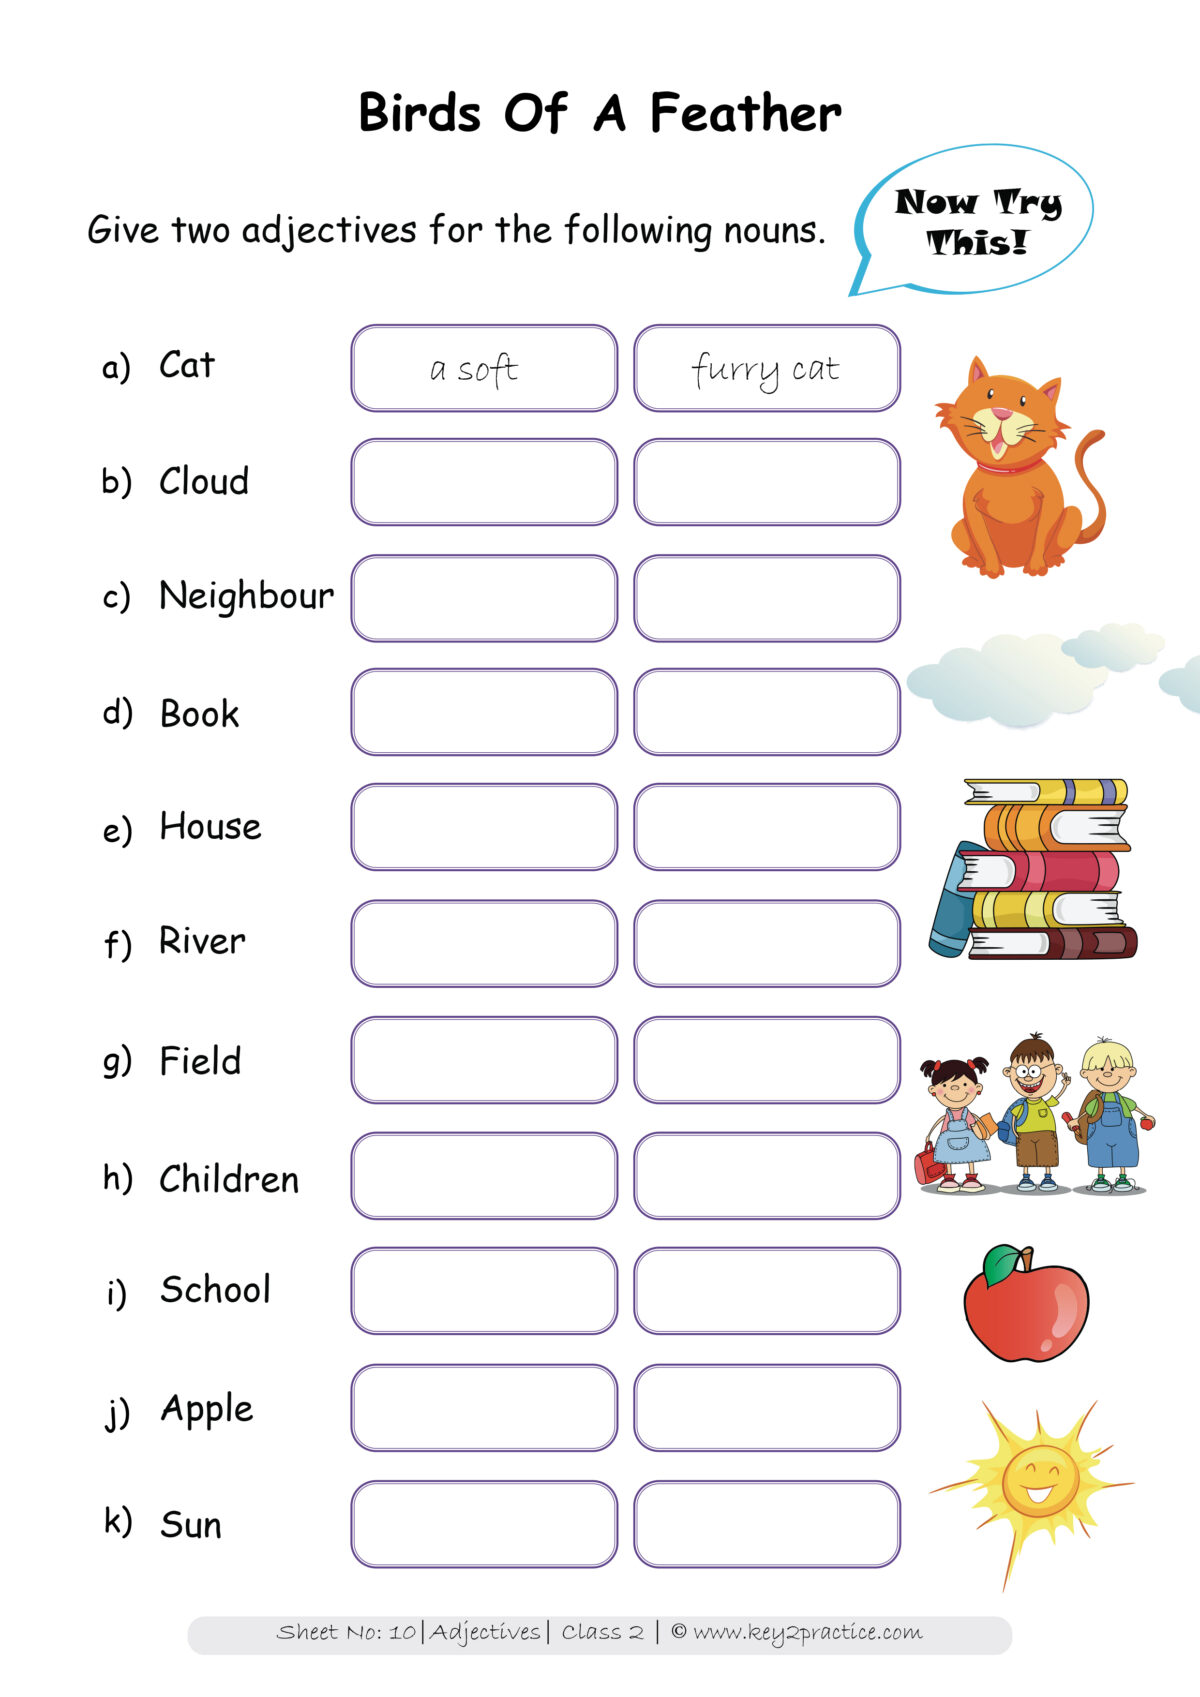 adjectives-synonyms-and-antonyms-worksheet-free-printable-adjectives-worksheets